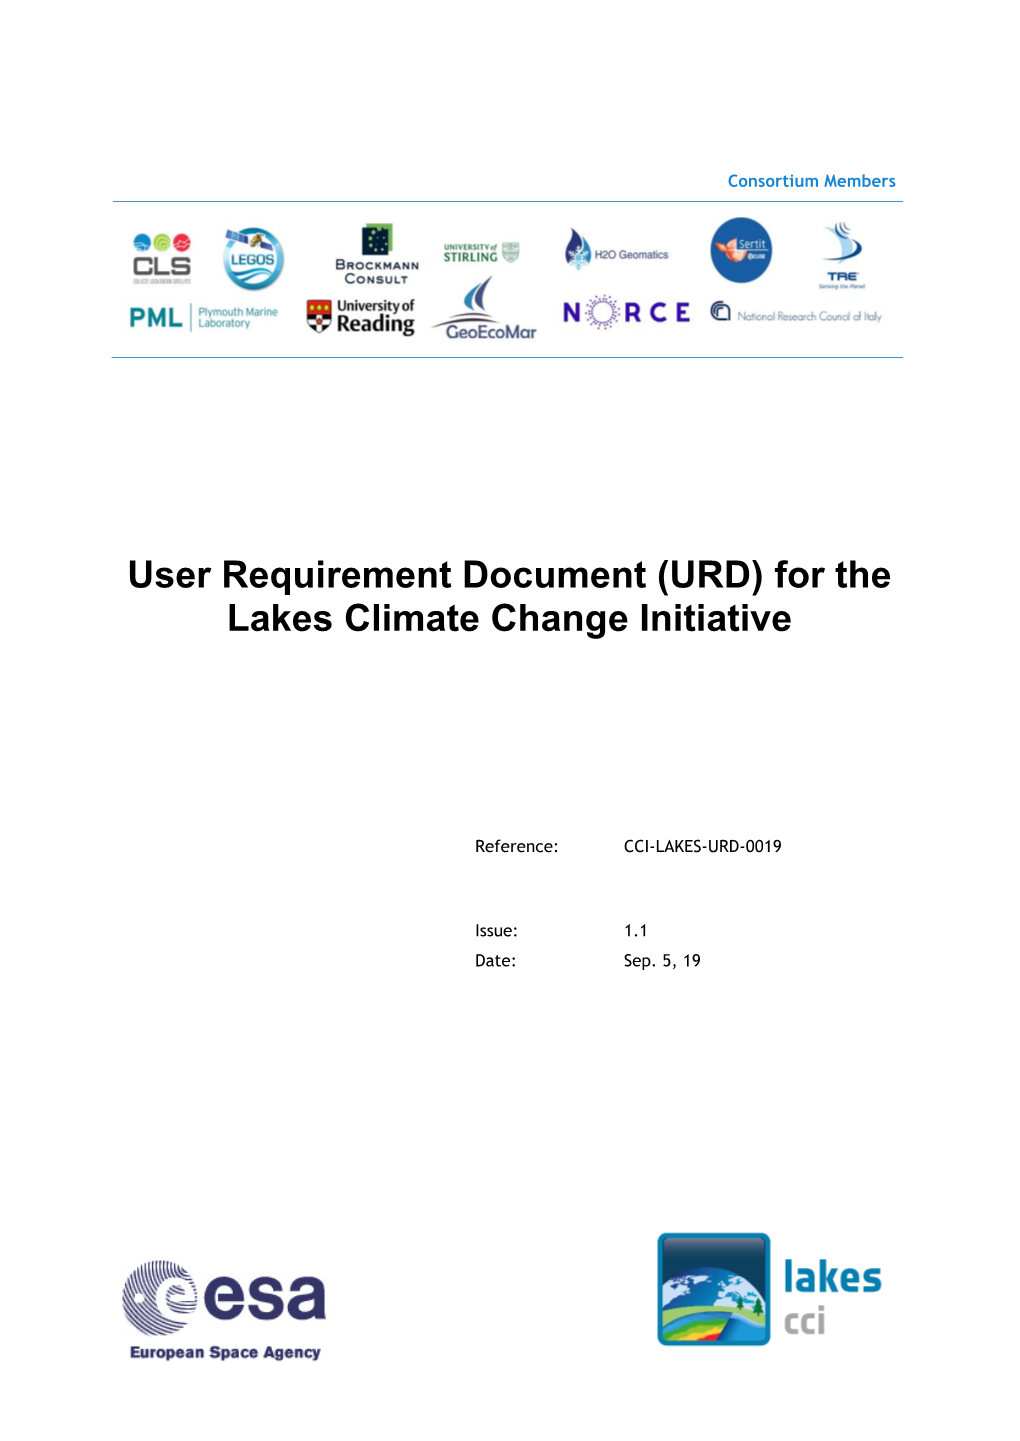 User Requirement Document (URD) for the Lakes Climate Change Initiative